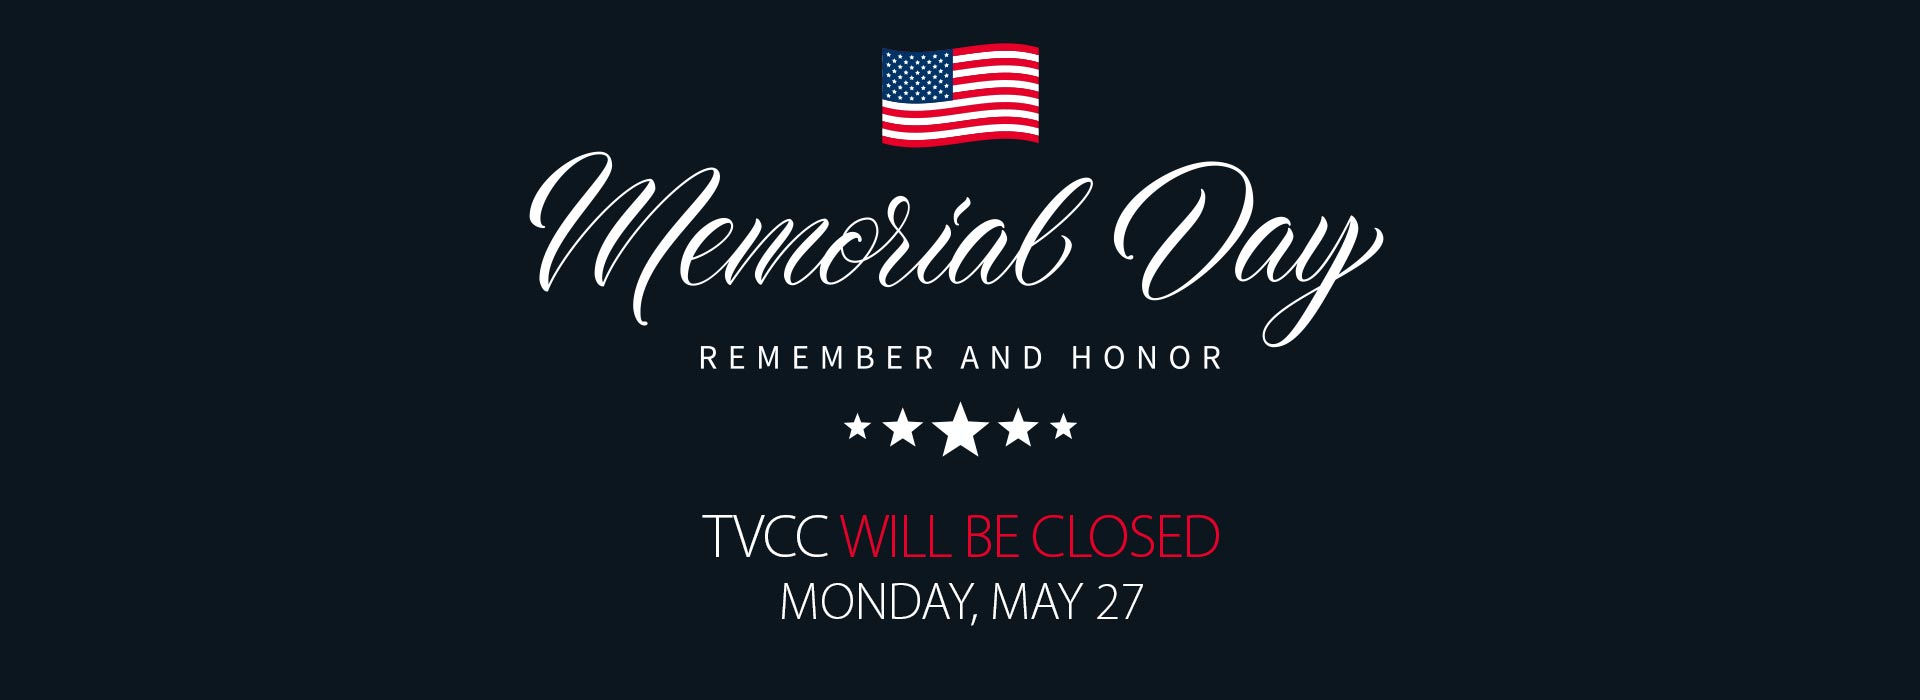 Memorial Day - Remember and honor.  TVCC will be closed Monday, May 27